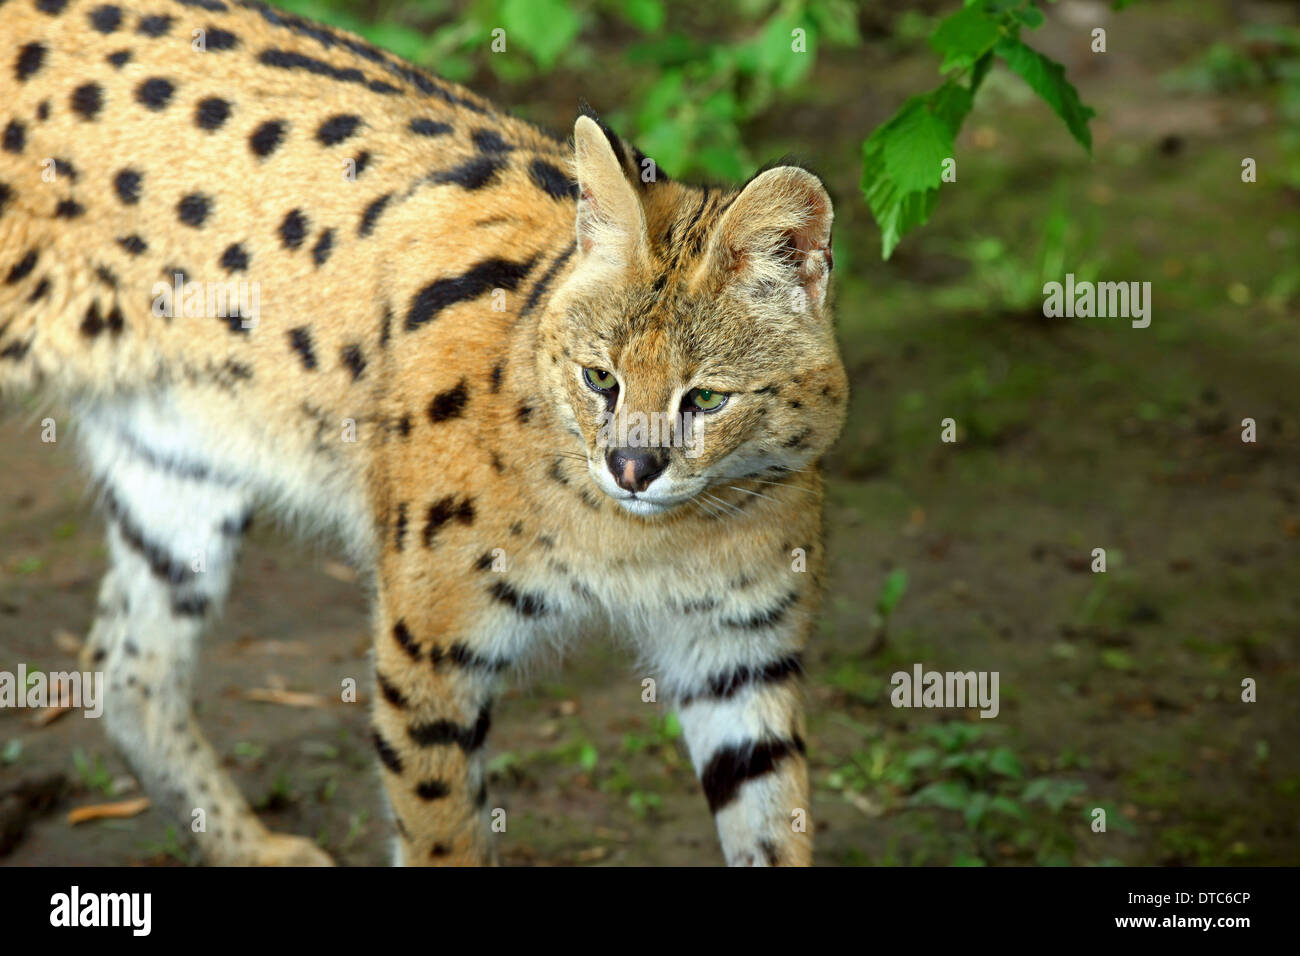 Serval Cat (Leptailurus serval) in a forest habitat Stock Photo